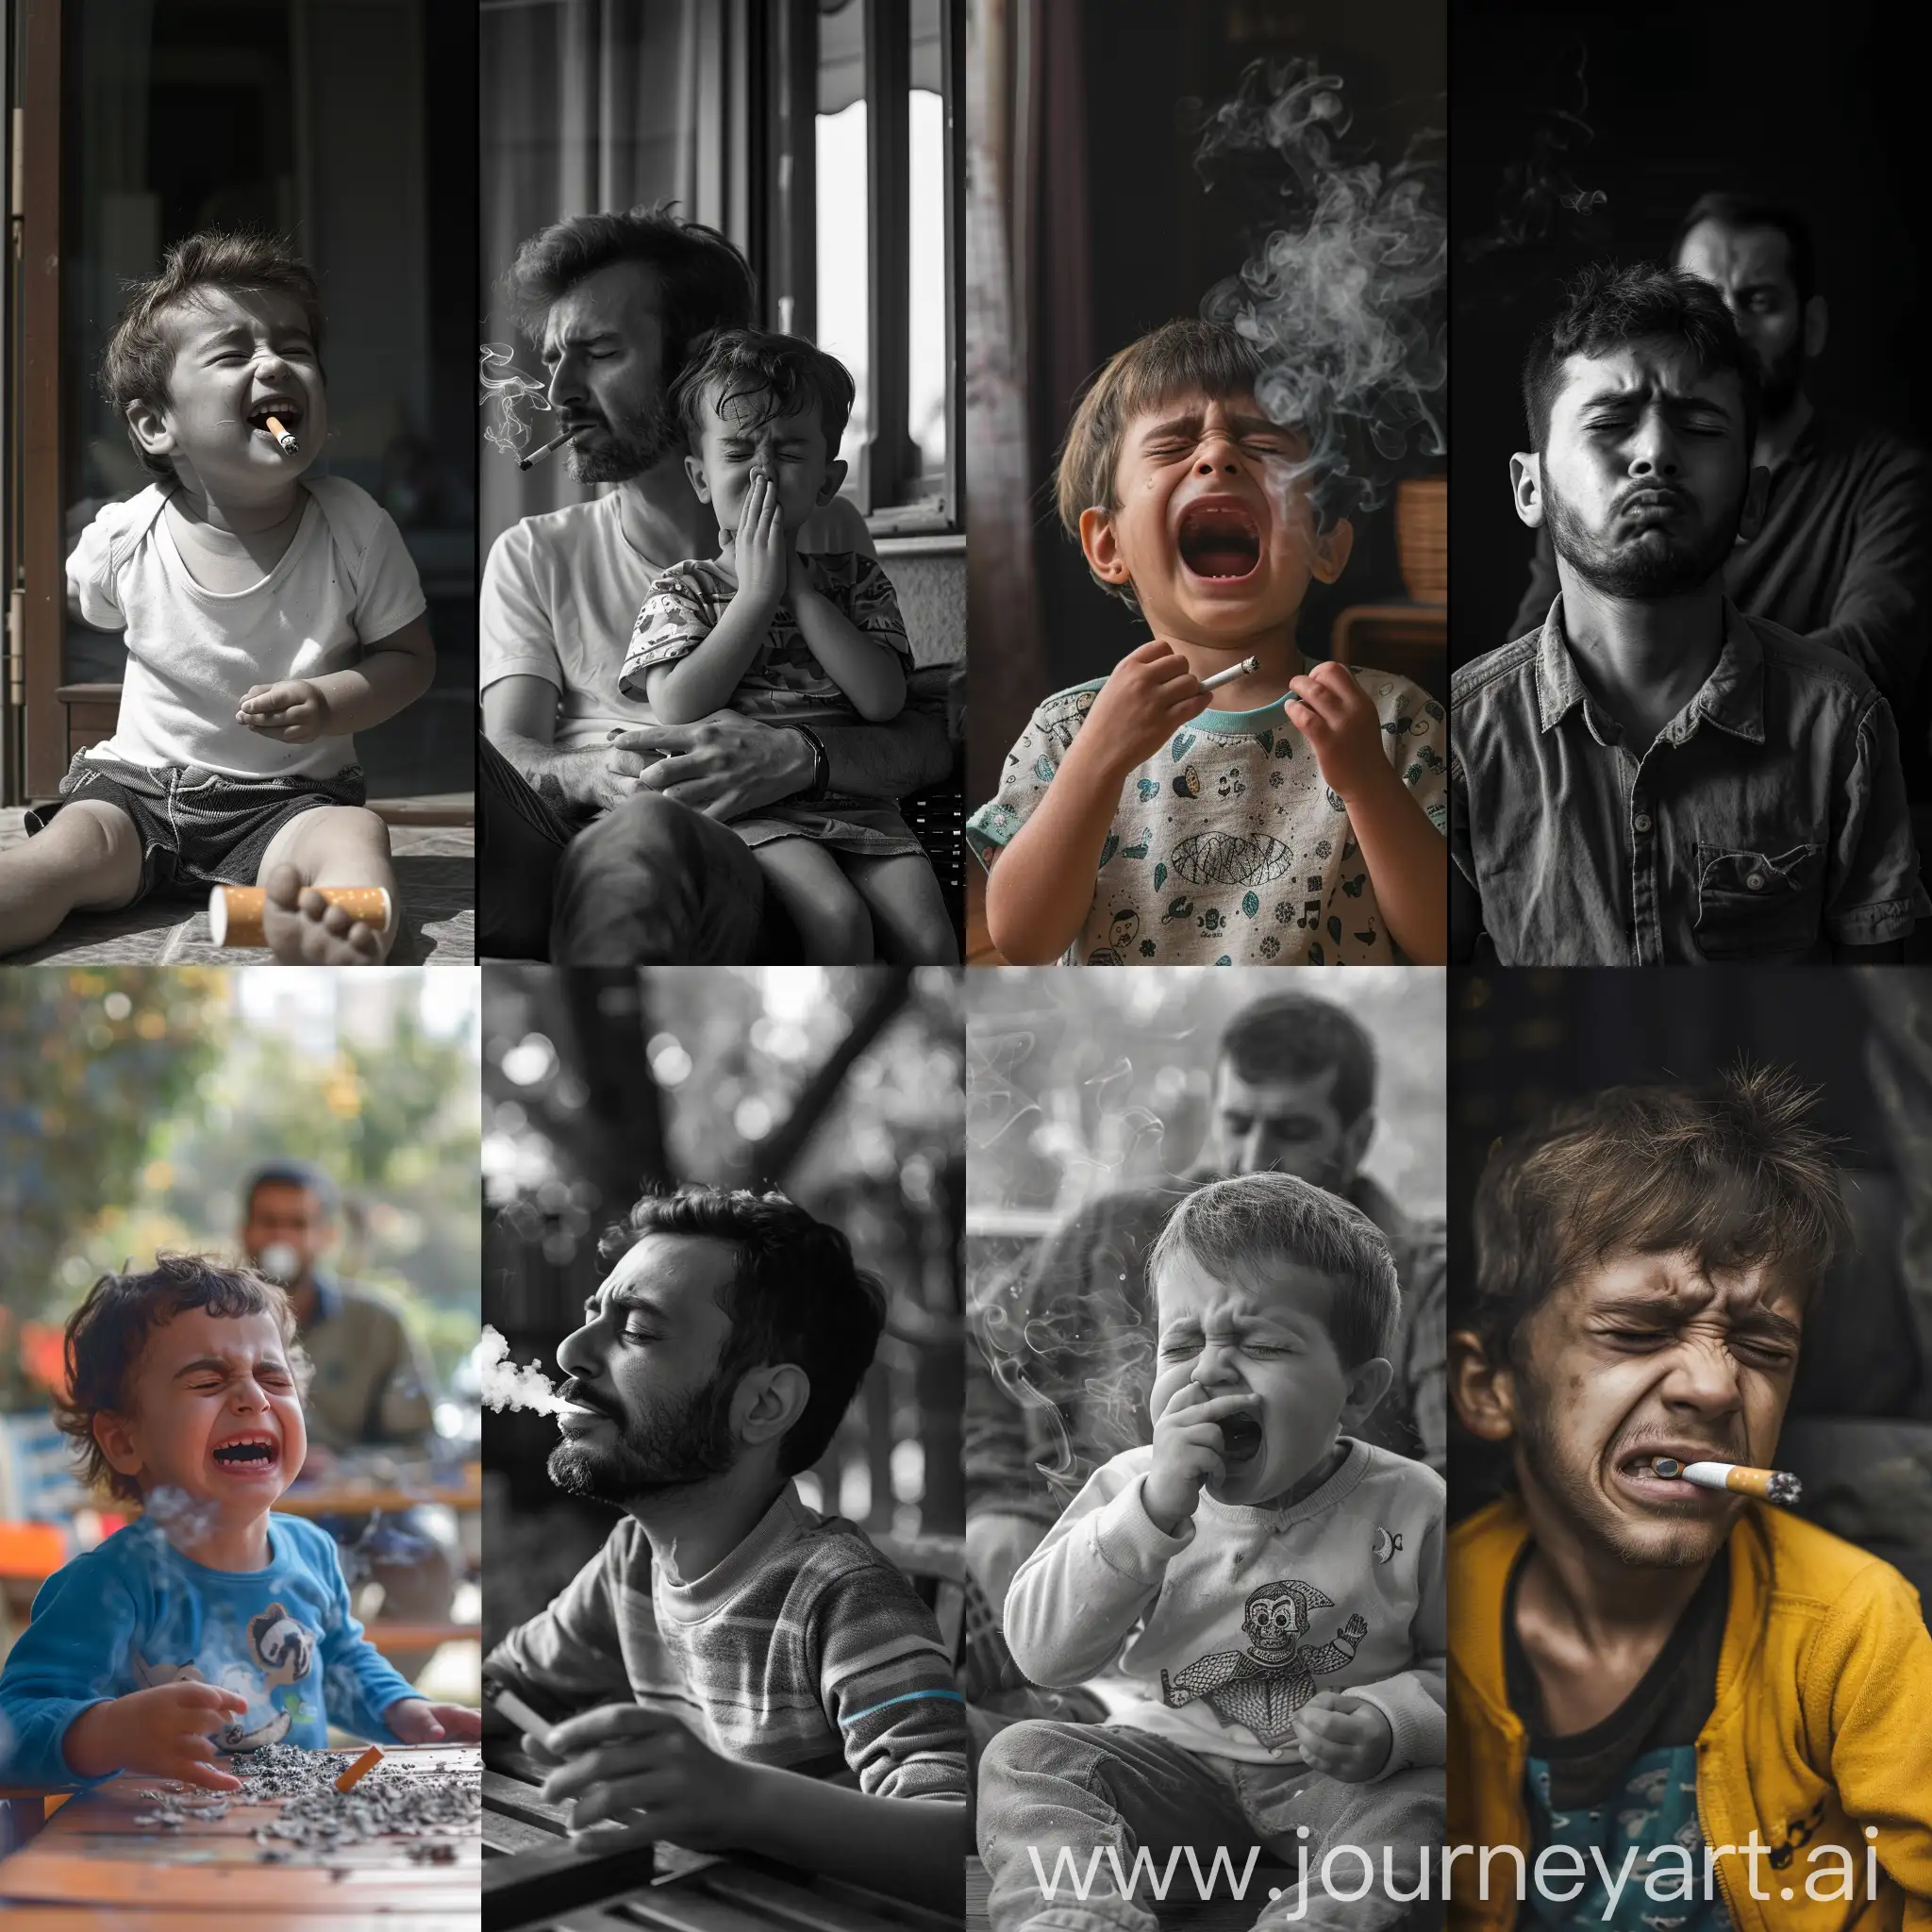 Contrasting-Emotions-Joy-and-Sadness-in-Childhood